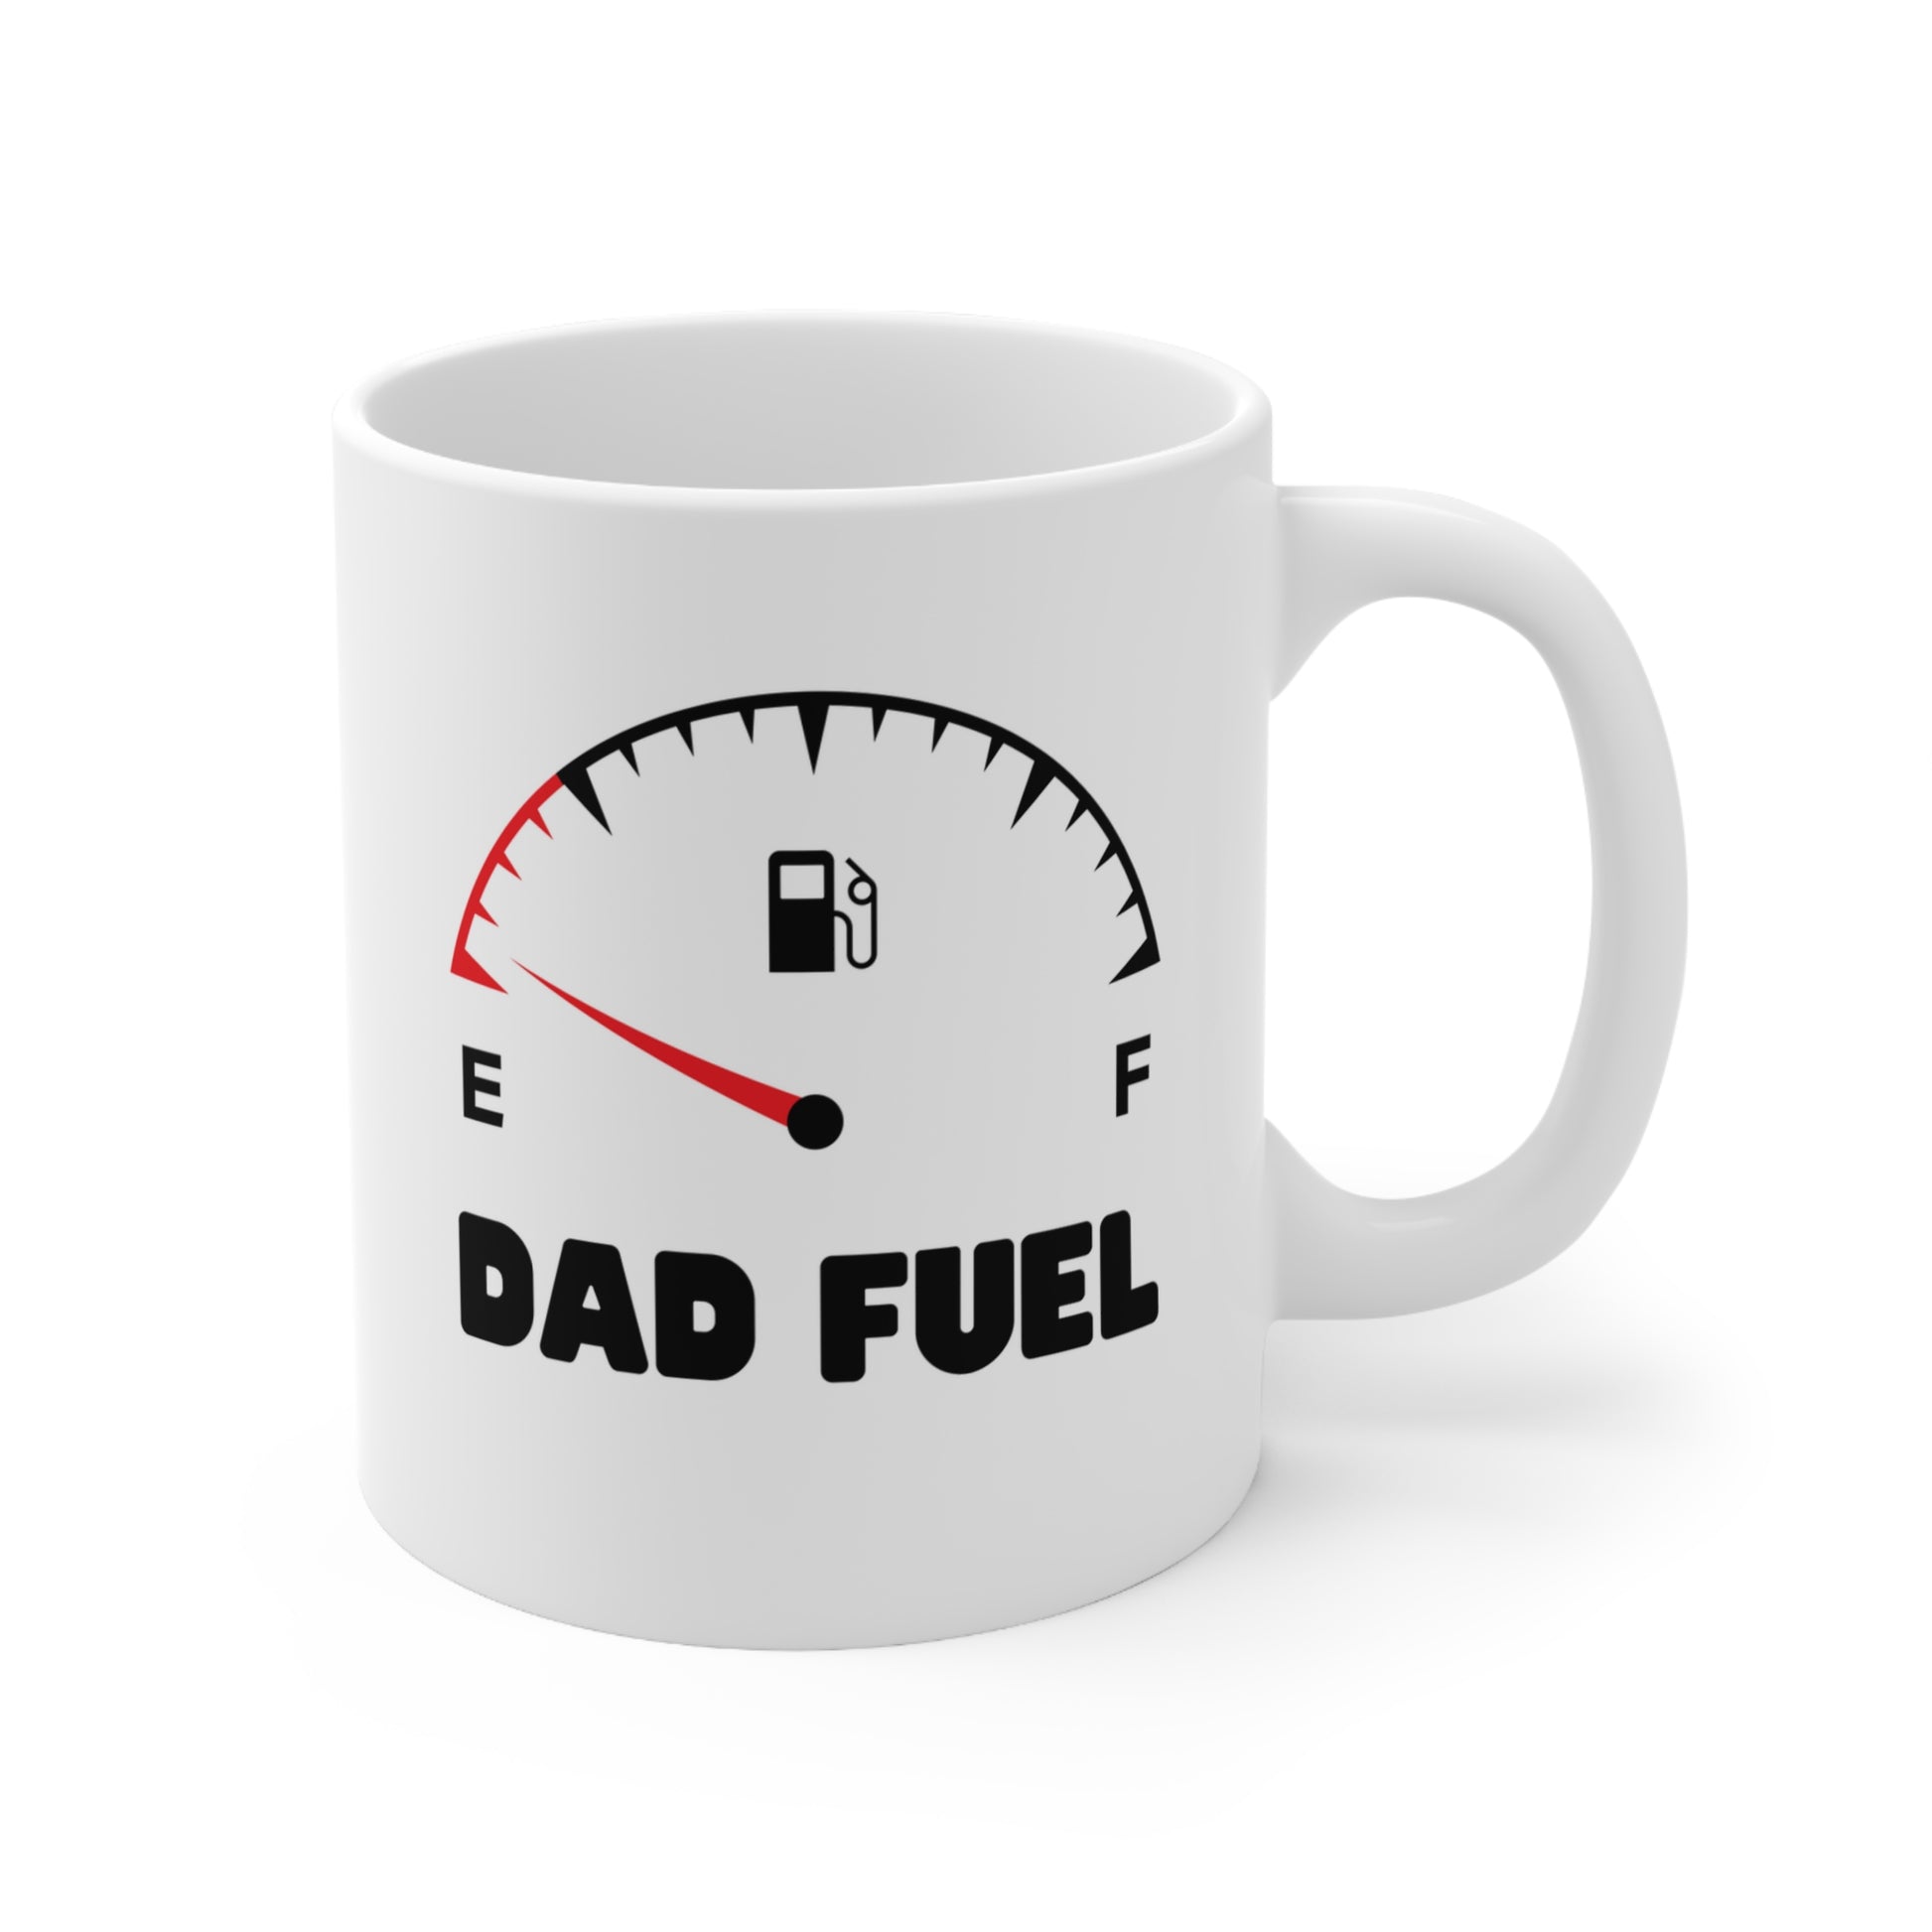 Dad Fuel Mug - Father's Day Gift for Him